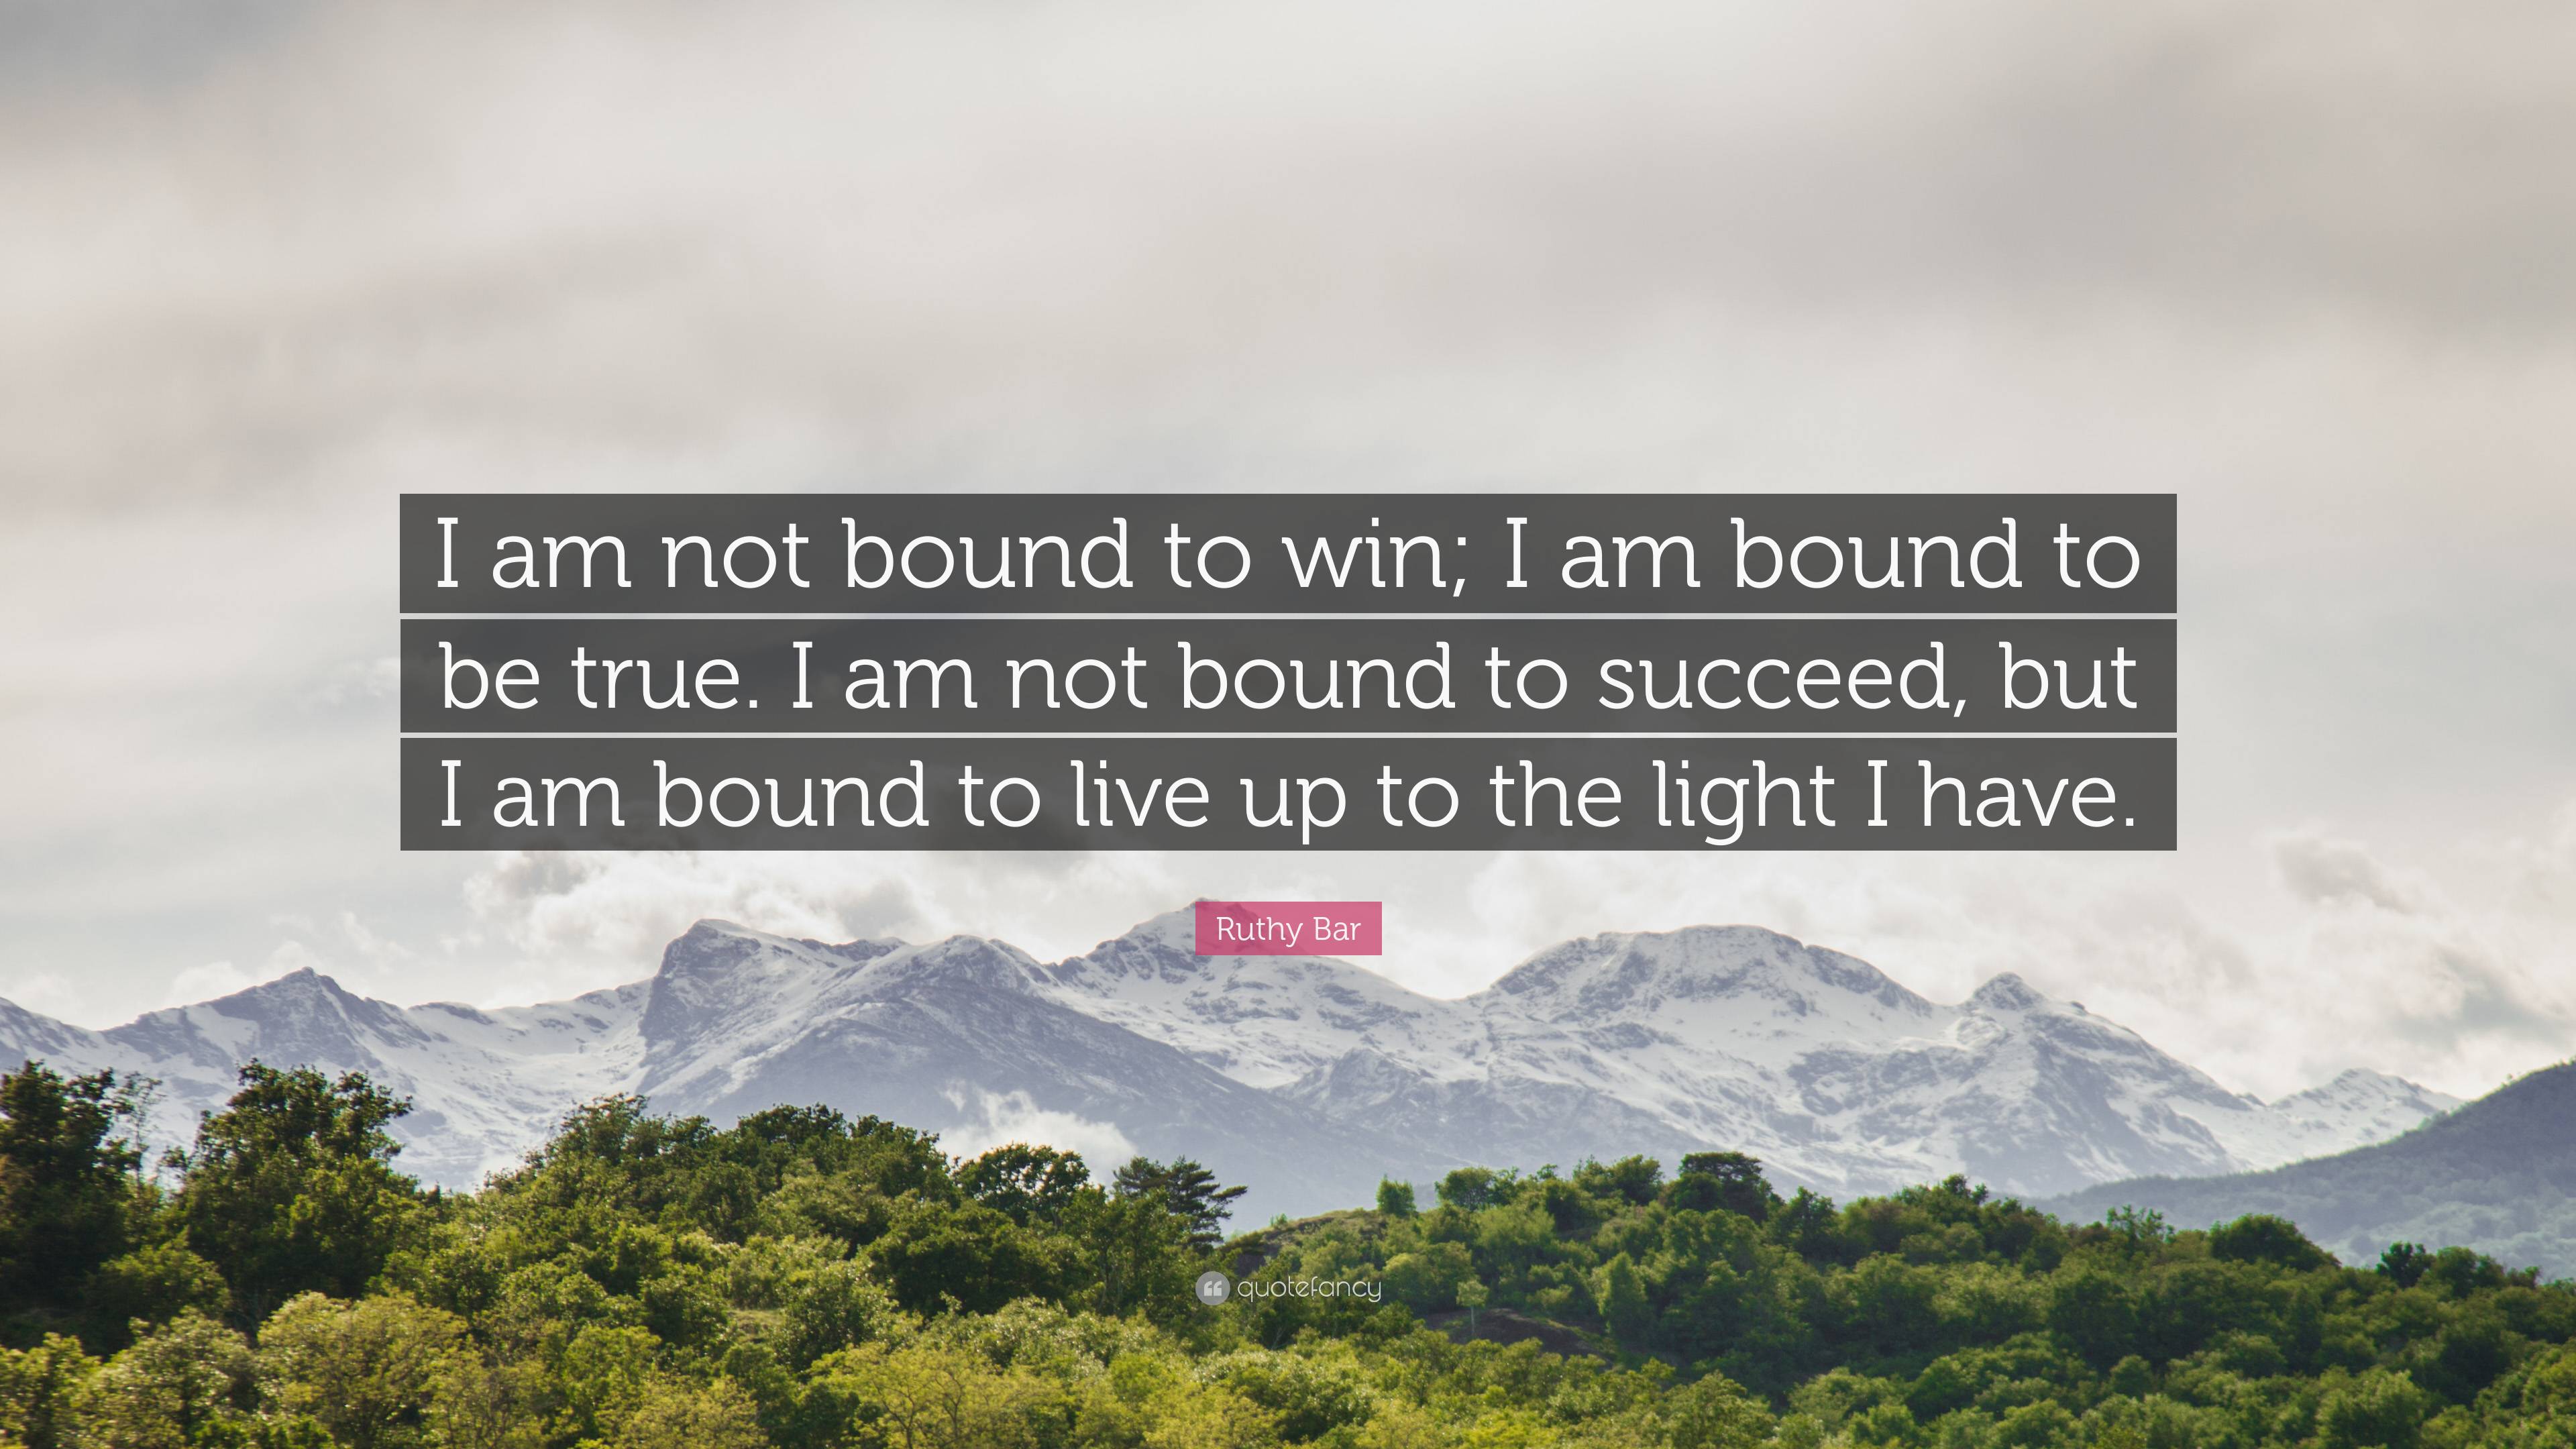 Ruthy Bar Quote: “I am not bound to win; I am bound to be true. I am ...